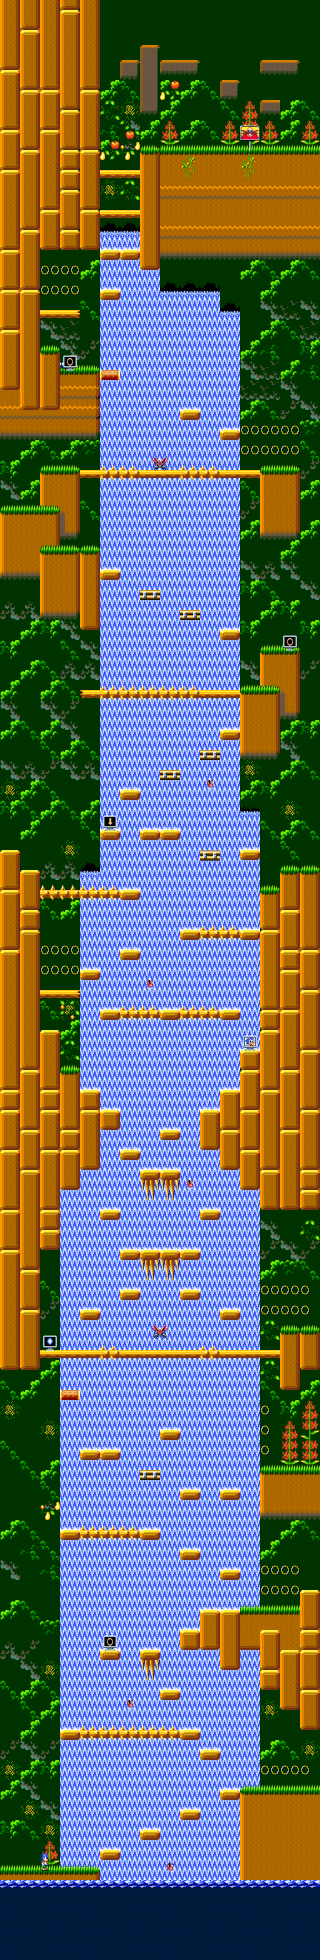 Sonic1 GG Map JZ2.png